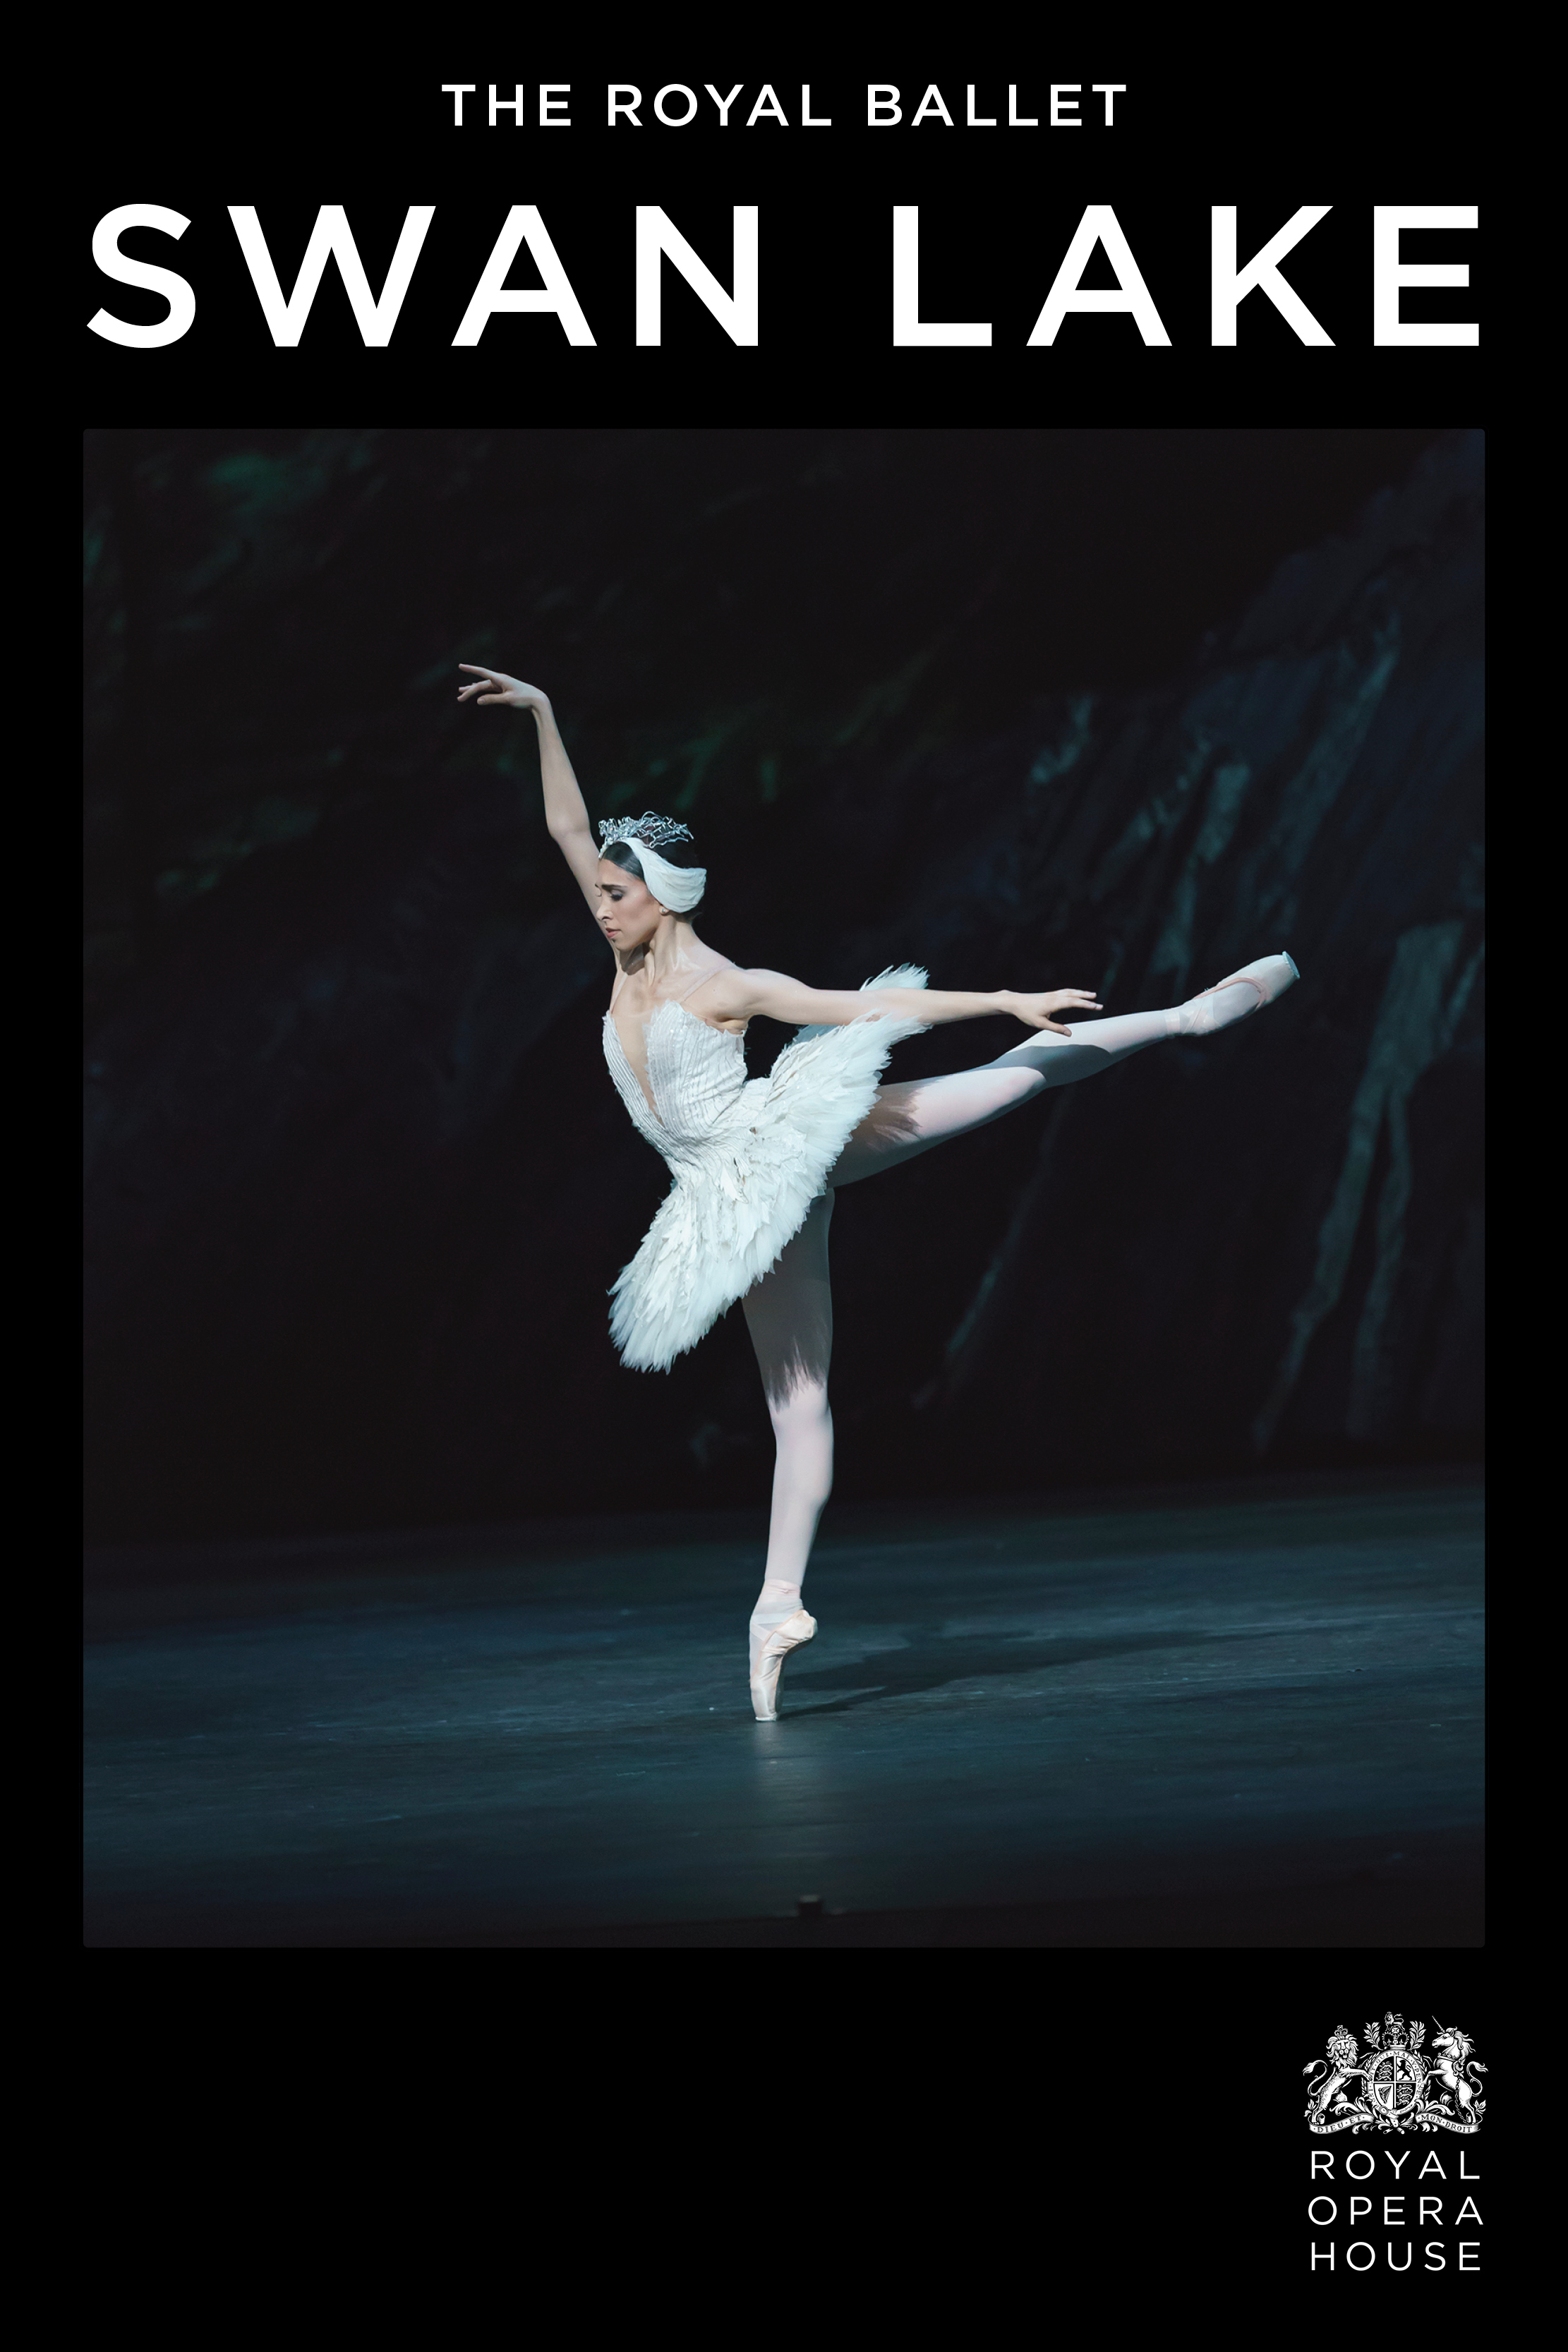 The Royal Ballet Live presents Swan Lake - Classical ballet's most powerful tale of love, treachery and forgiveness